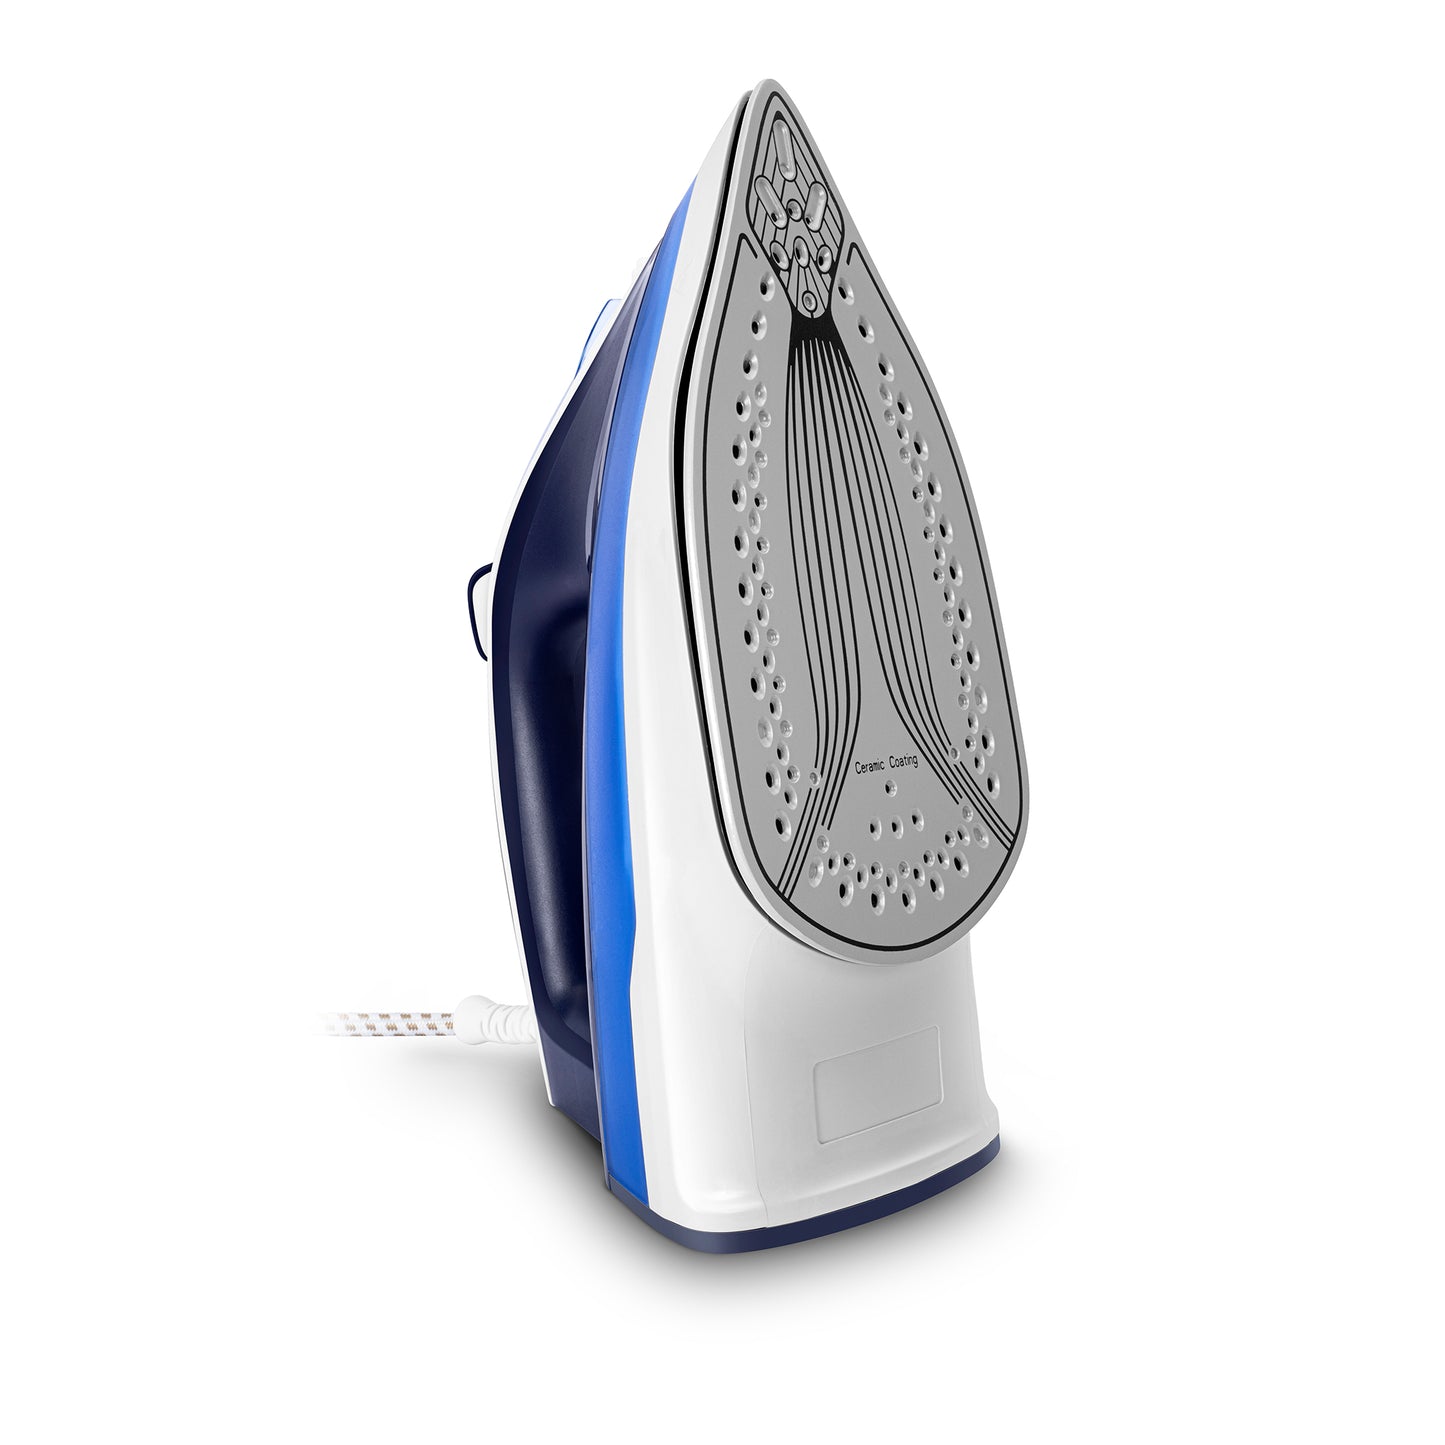 Wipro Vesta 2200W Steam Iron with Steam Burst, Vertical and Horizontal Ironing, Non-Stick Coated Soleplate, White and Navy Blue, Standard (VD051220)